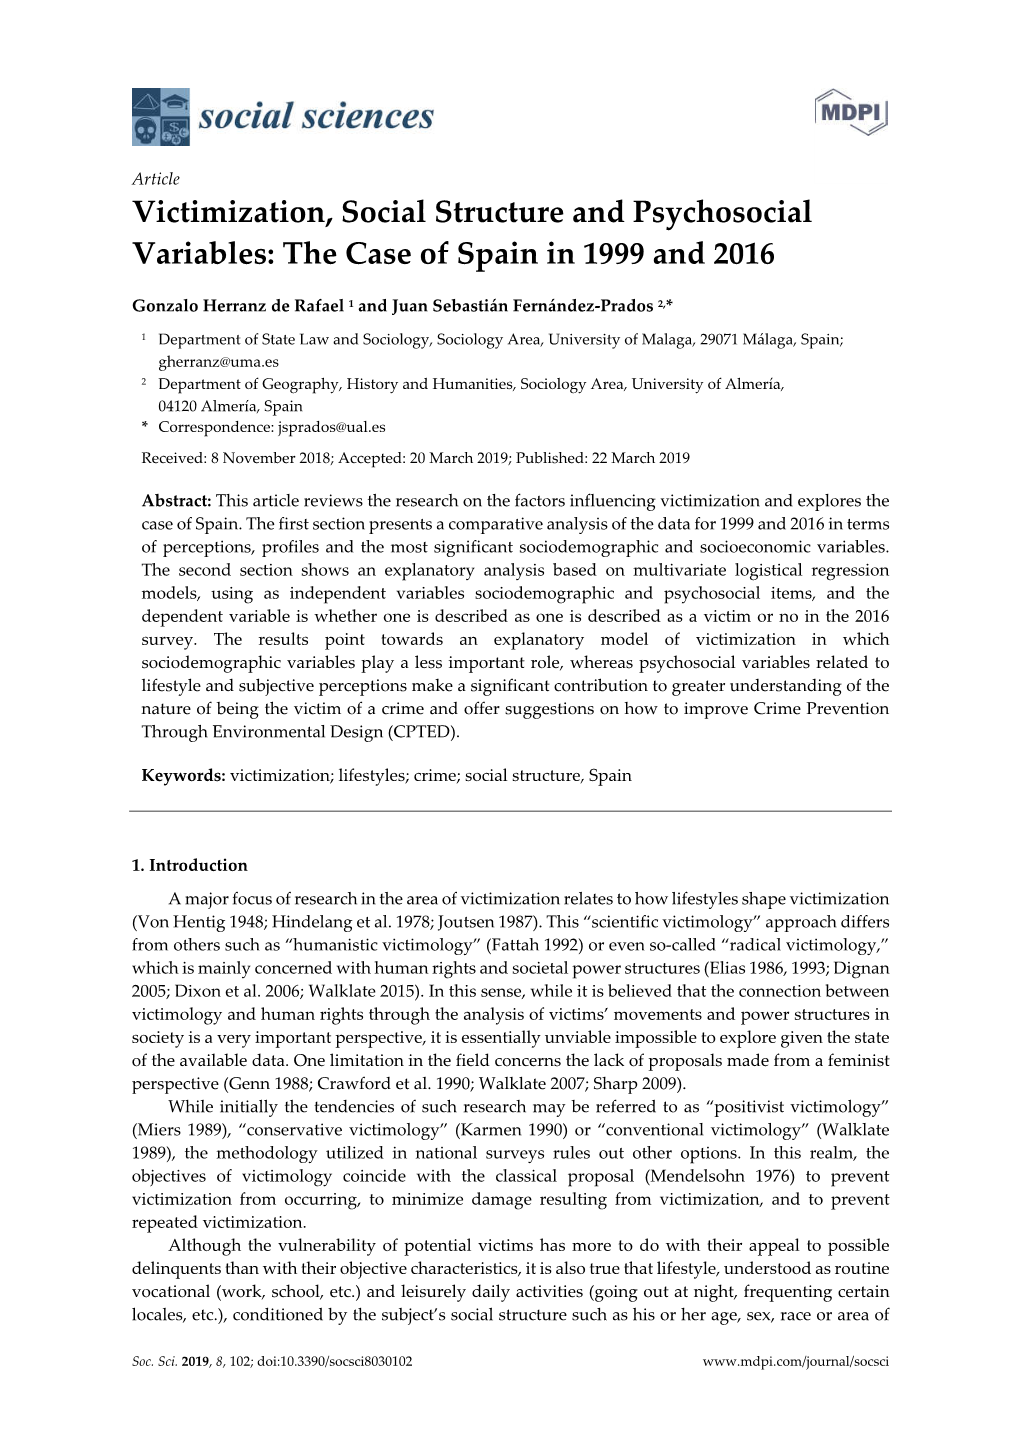 Victimization, Social Structure and Psychosocial Variables: the Case of Spain in 1999 and 2016